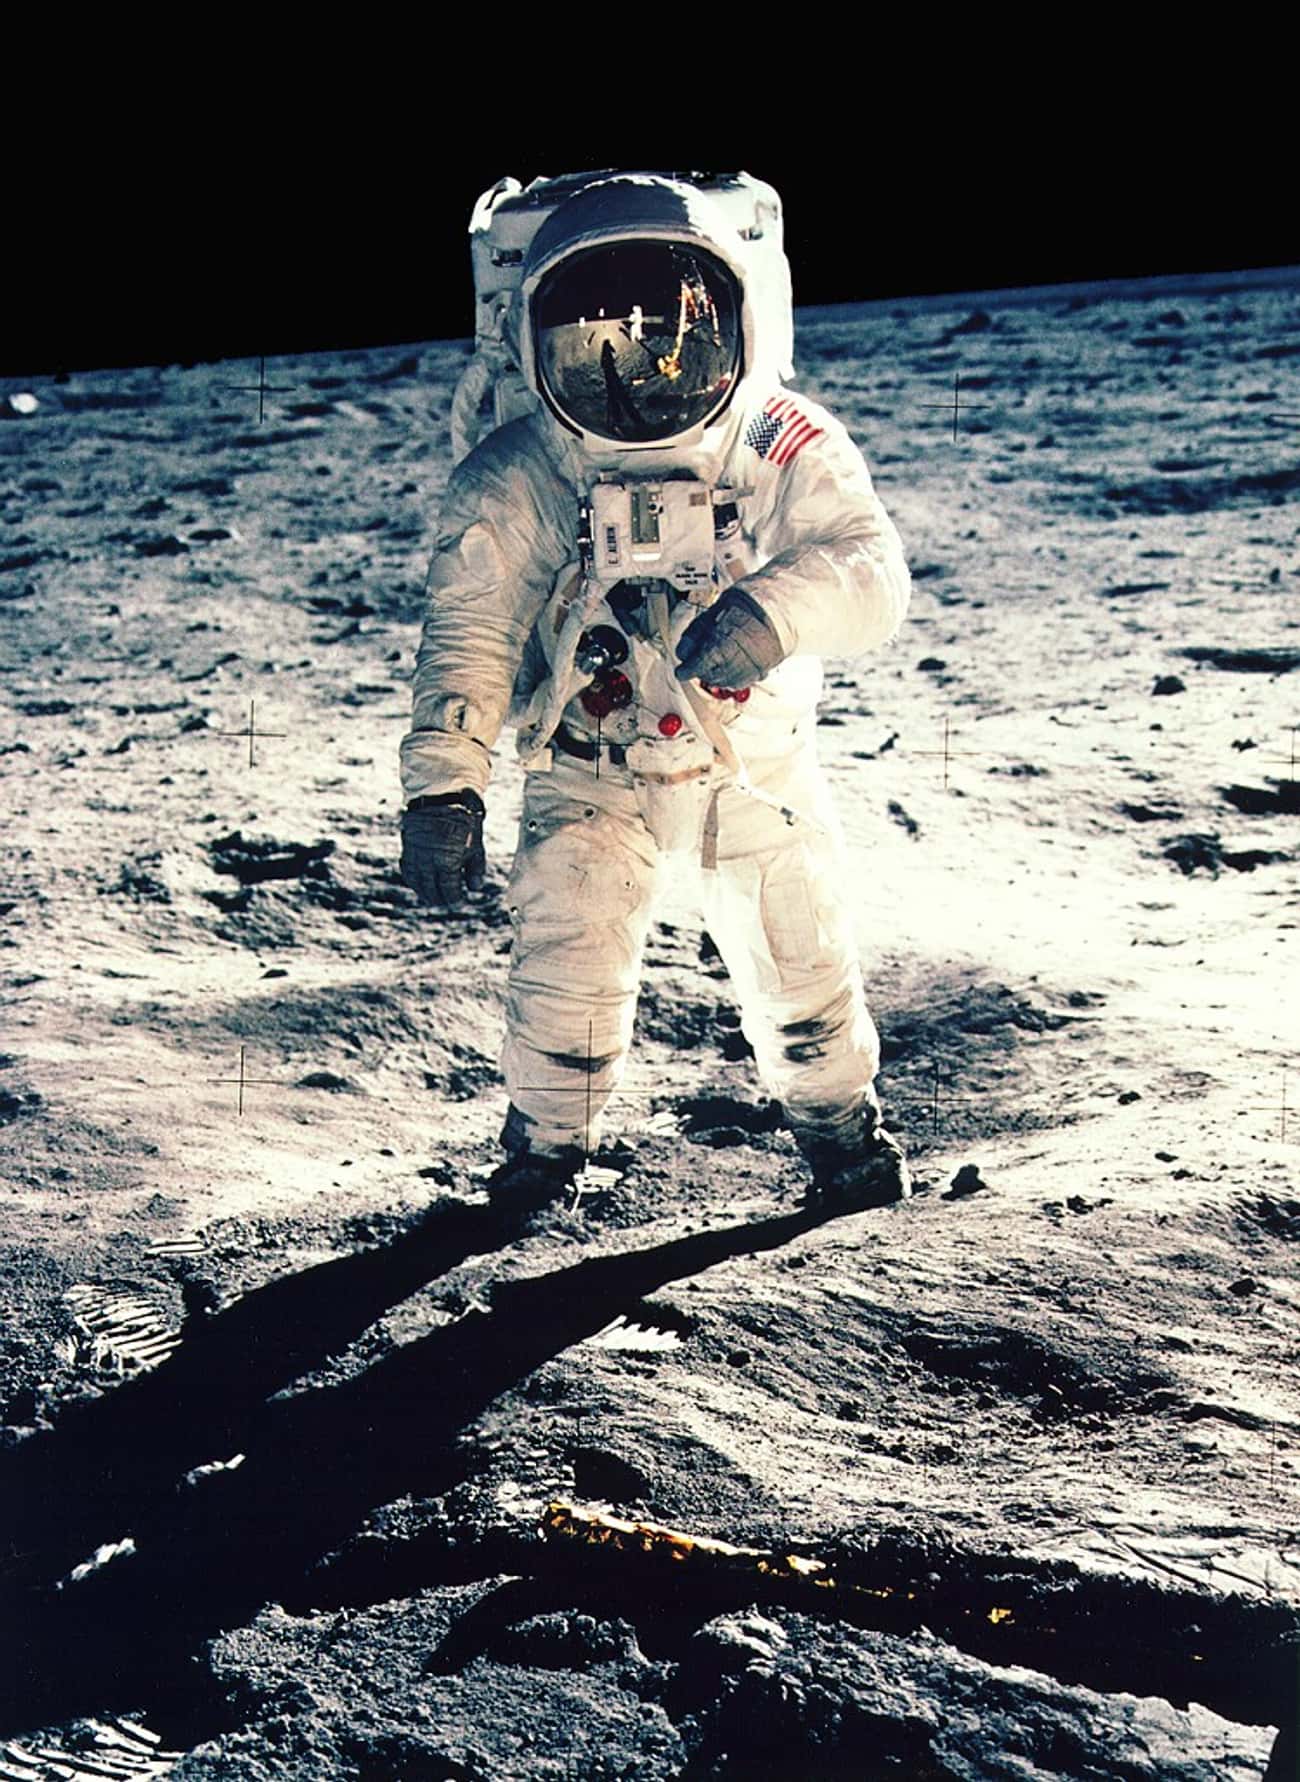 Neil Armstrong Took This Shot Of Buzz Aldrin, With His Own Reflection In The Visor